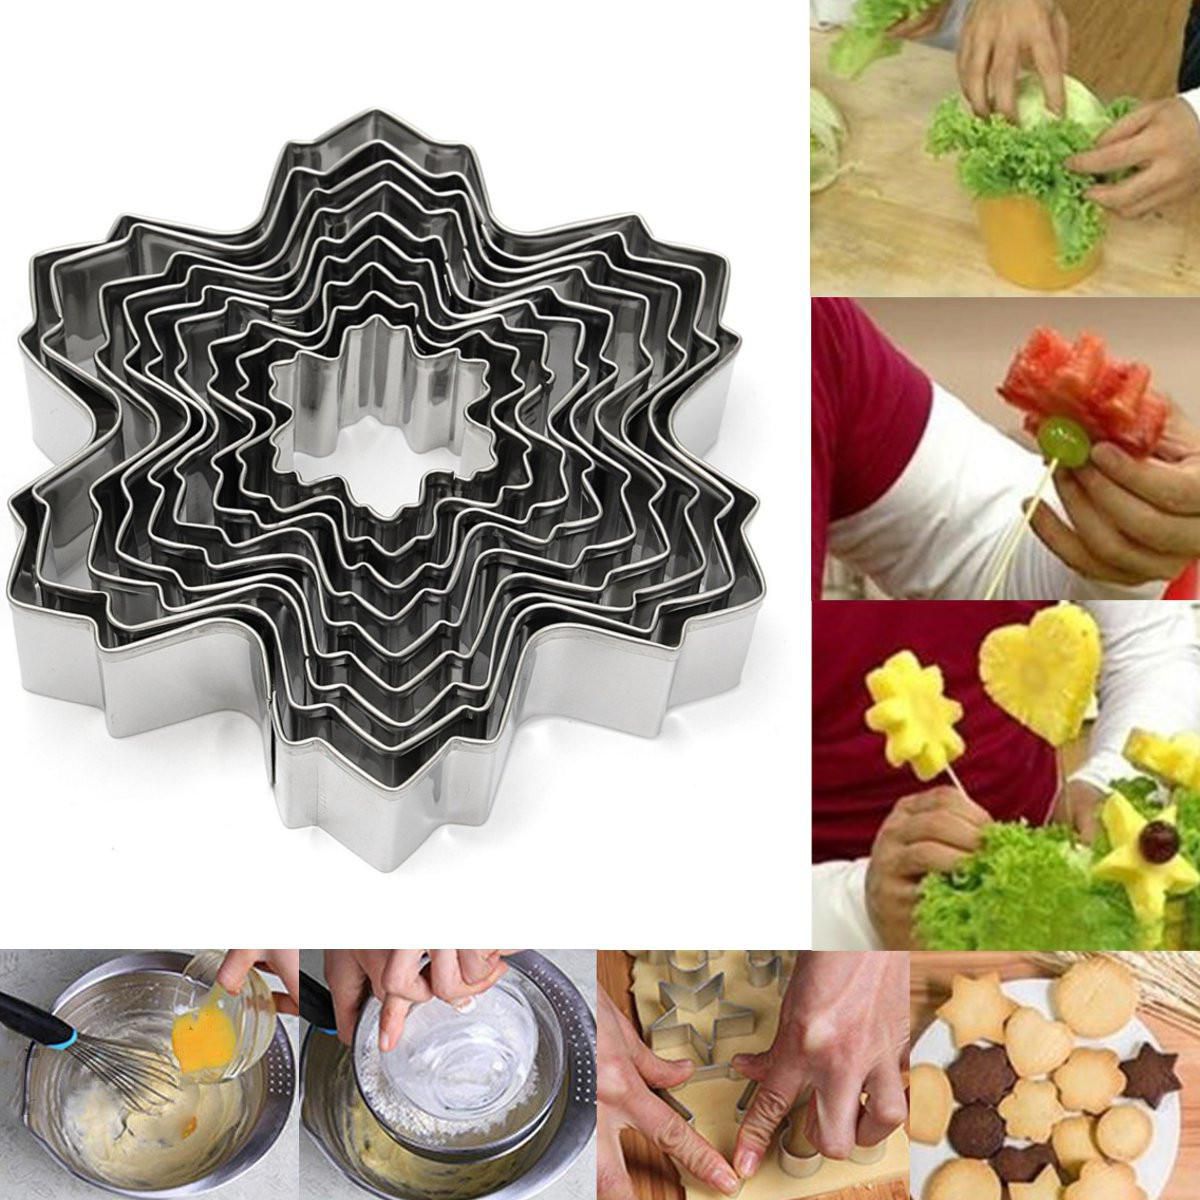 9Pcs Christmas Steel Sownflake Biscuit Cookie Cutter Fondant Cake Mold Mould  Set: Buy 9Pcs Christmas Steel Sownflake Biscuit Cookie Cutter Fondant Cake Mold  Mould Set Online at Low Price - Snapdeal